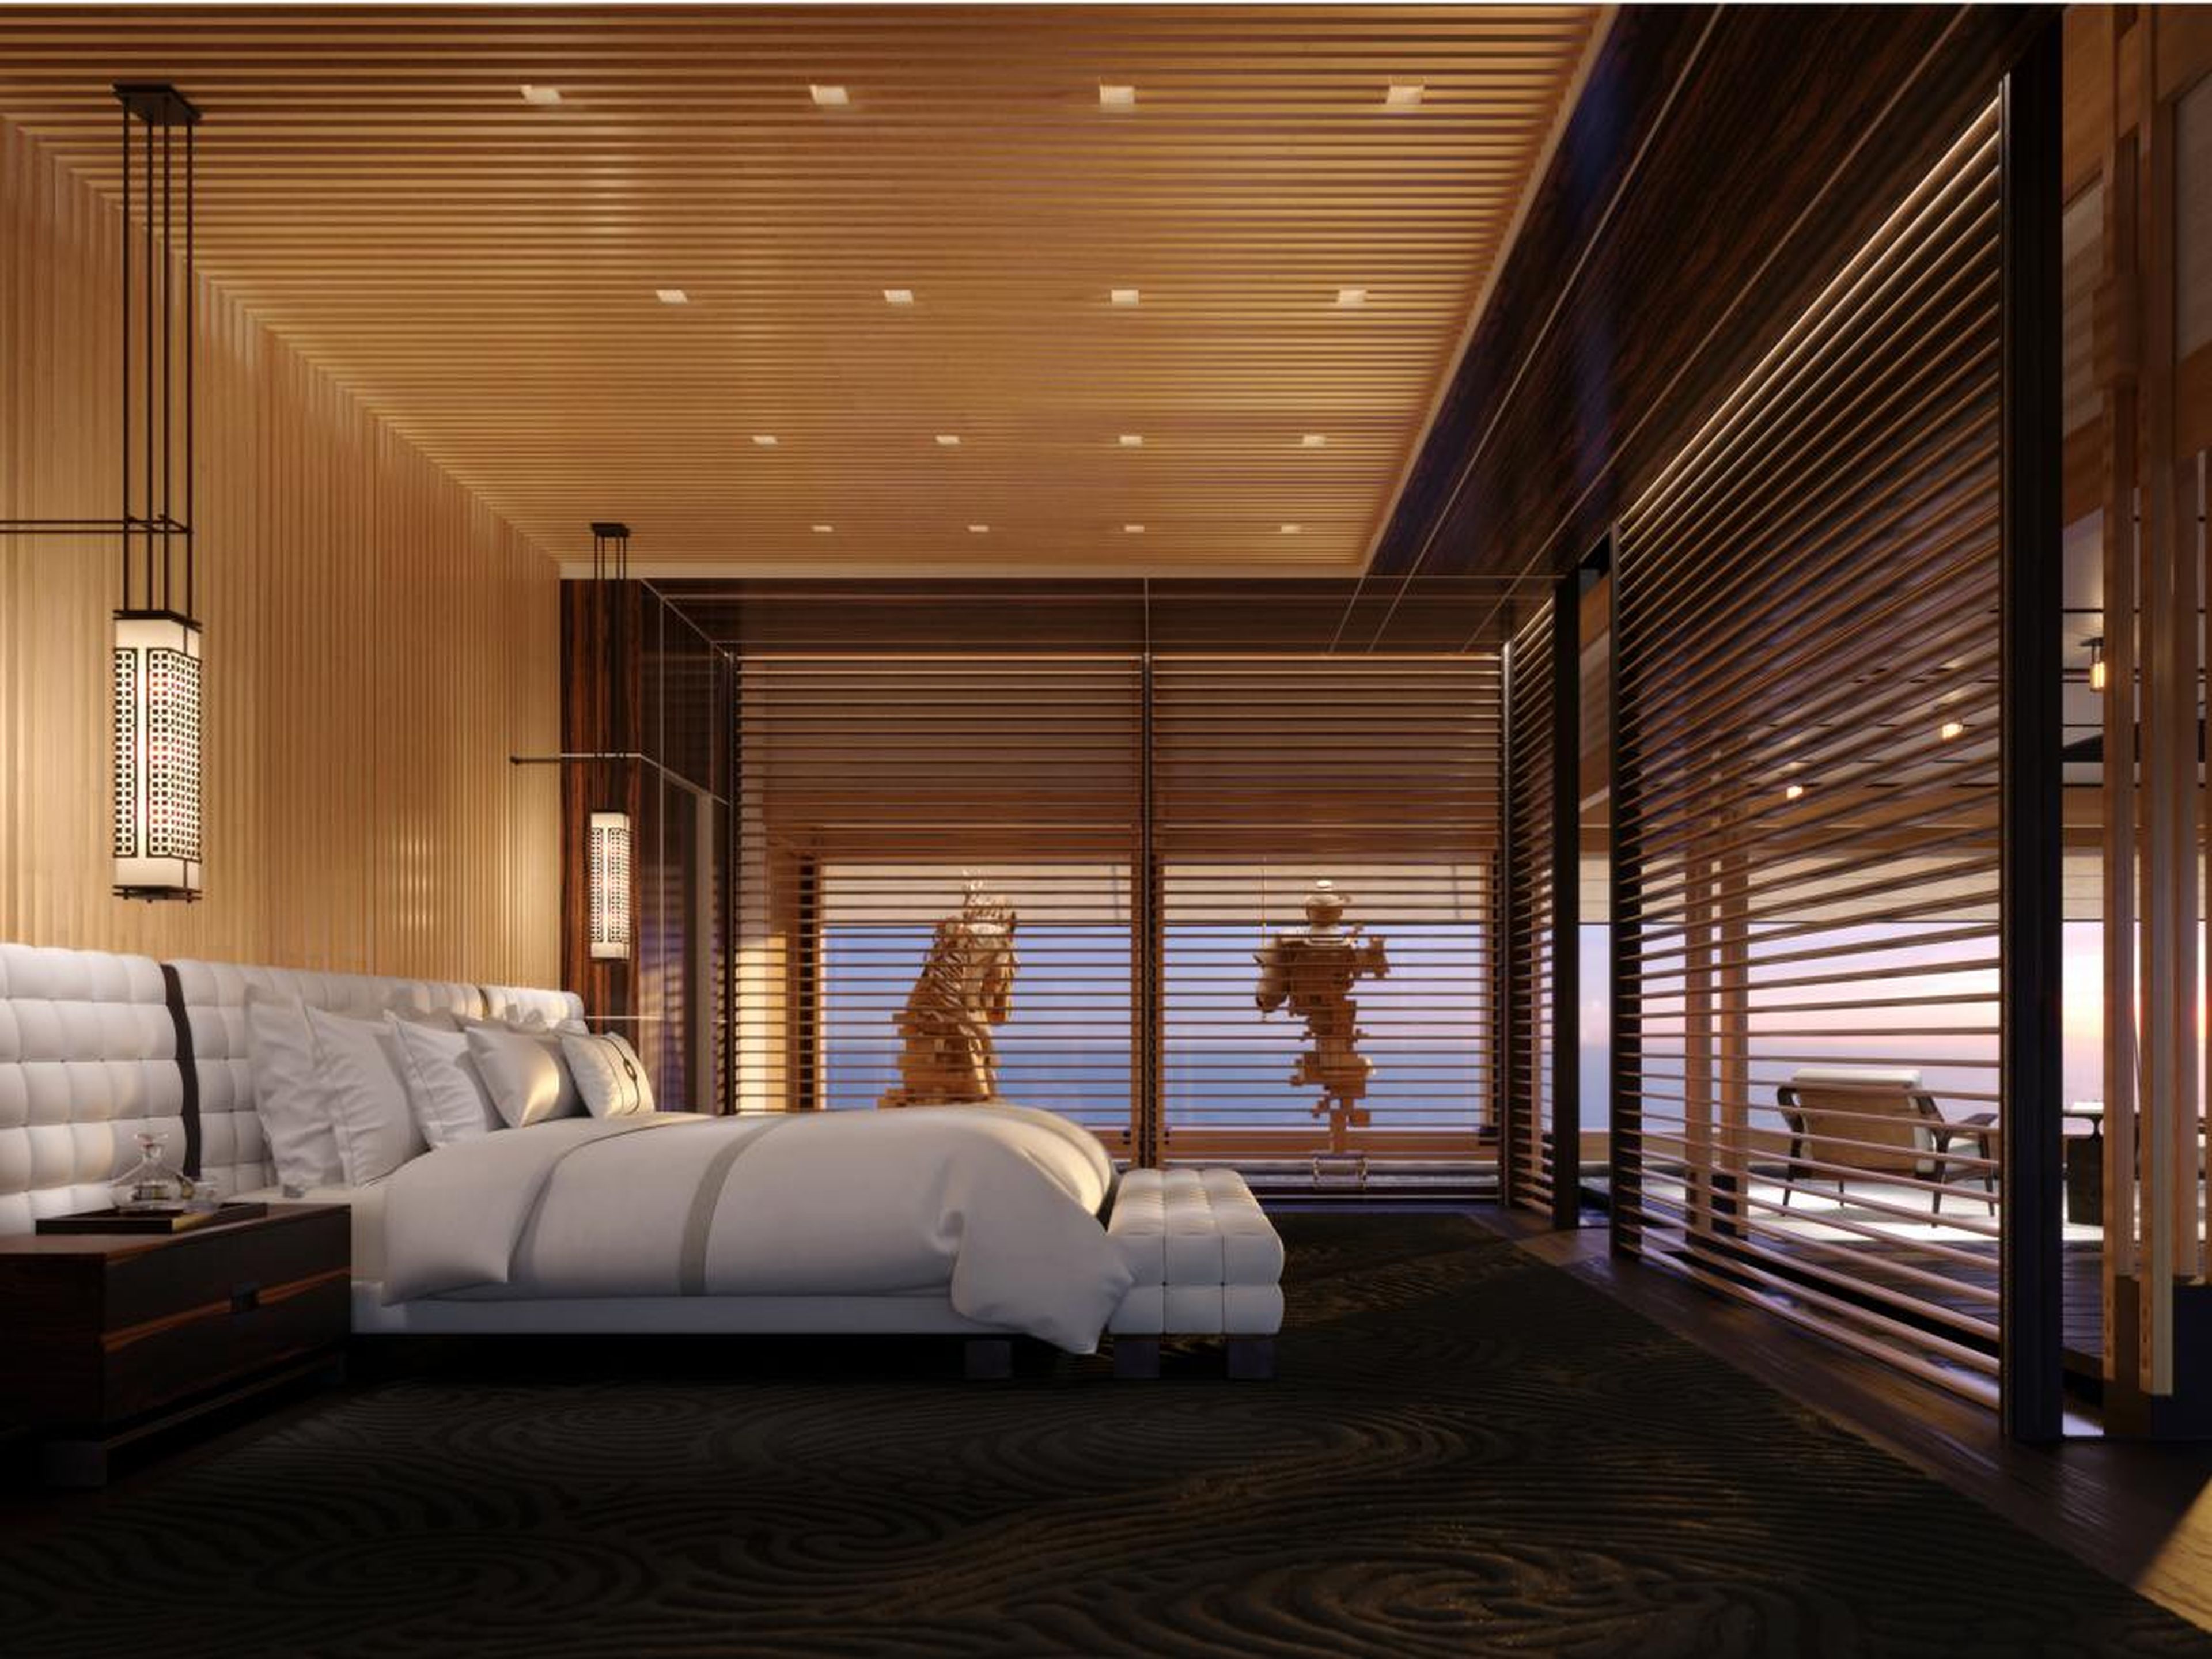 It would have a master pavilion, two VIP staterooms, and four regular staterooms. All rooms would feature floor-to-ceiling windows and have a minimalistic, Japanese-inspired style.